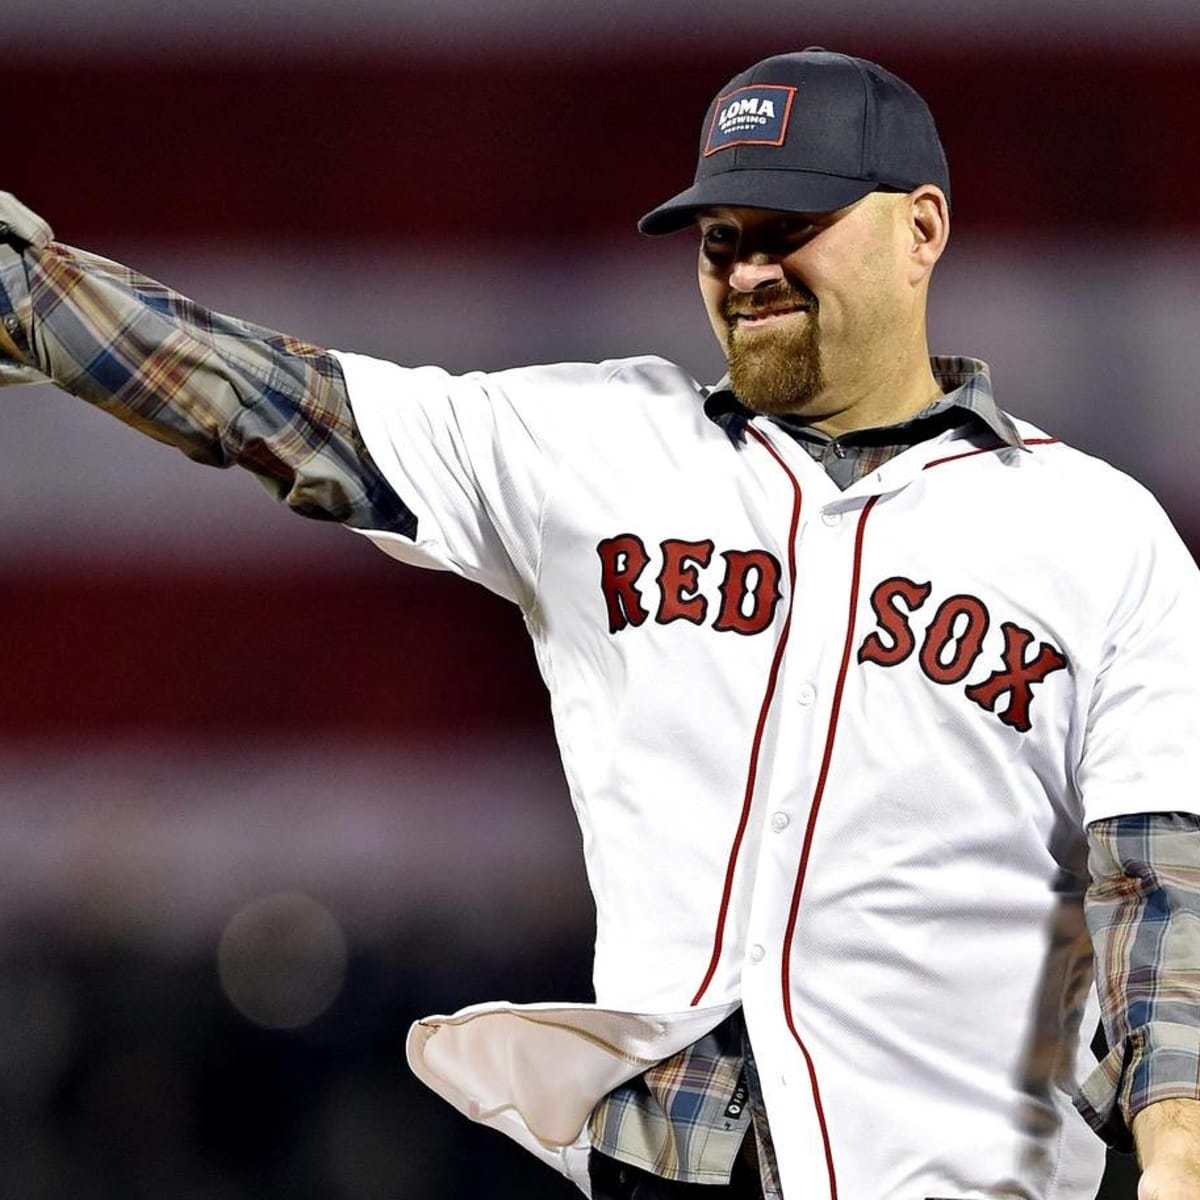 Kevin Youkilis & Tom Brady: 5 Fast Facts You Need to Know